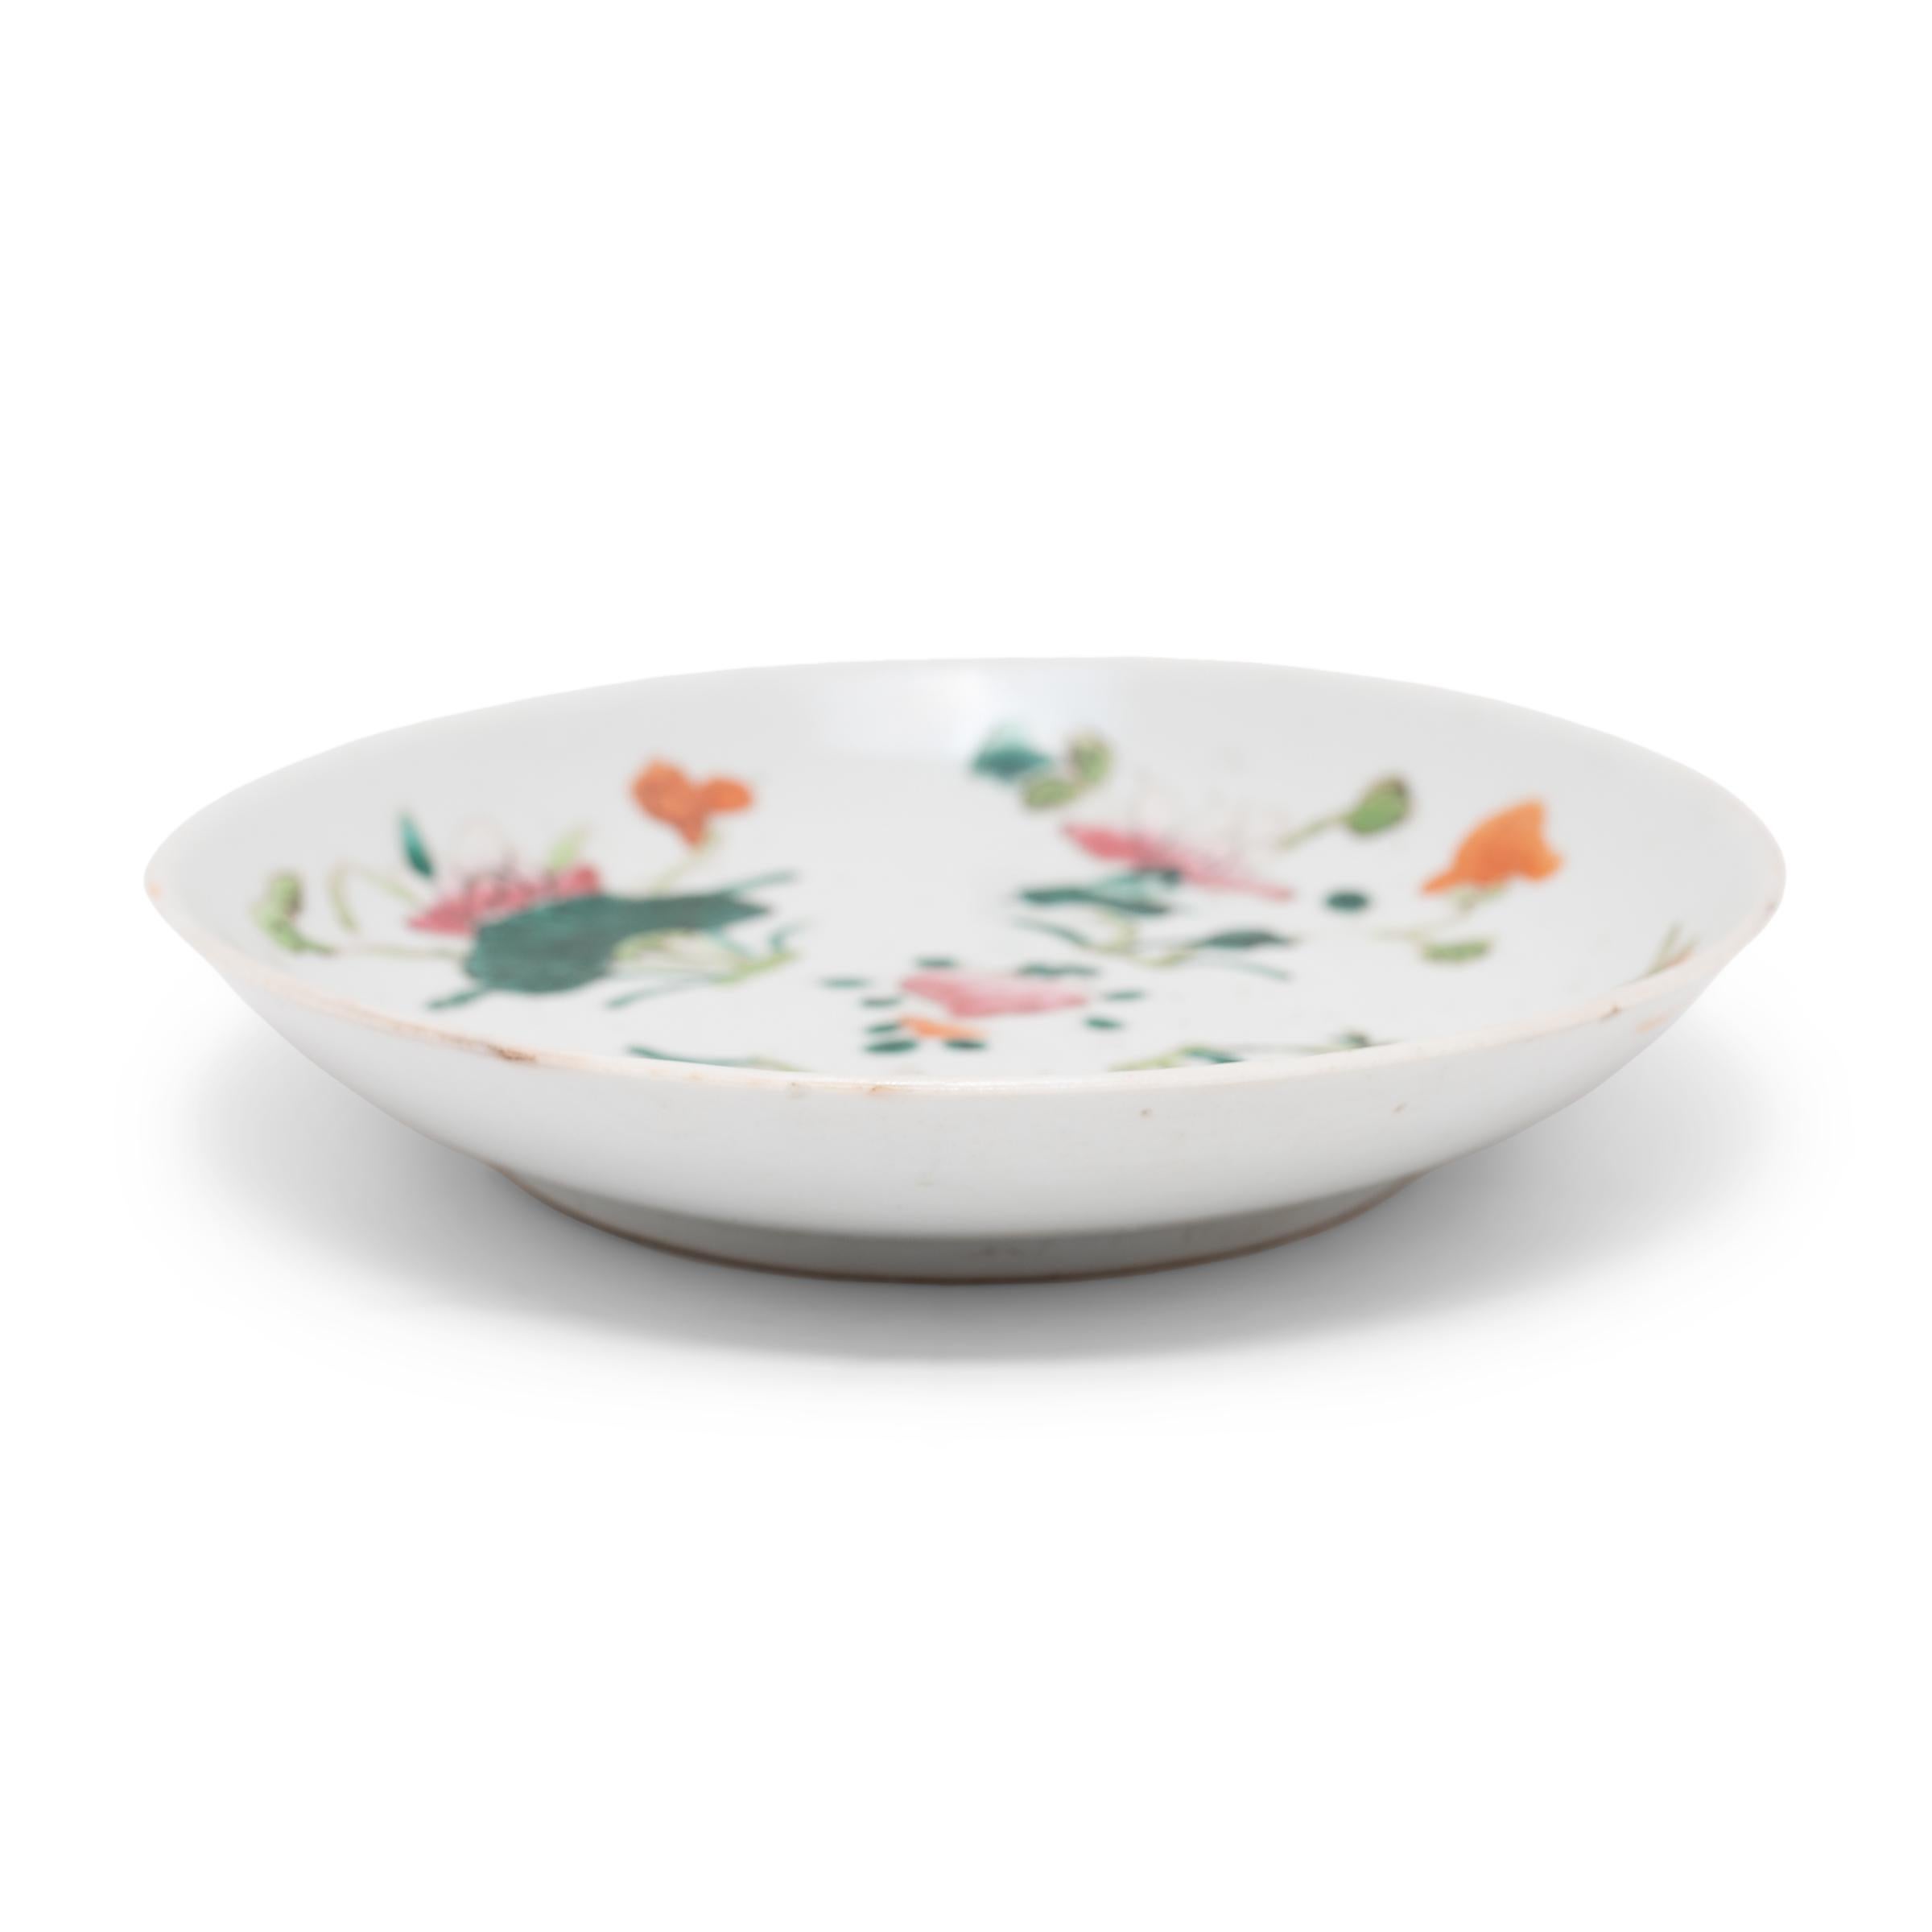 Painted with overglaze enamels in the famille rose style, this small porcelain dish is decorated with a common motif of four flowers symbolizing the seasons. The lotus represents summer, the chrysanthemums represent autumn, the plum blossoms